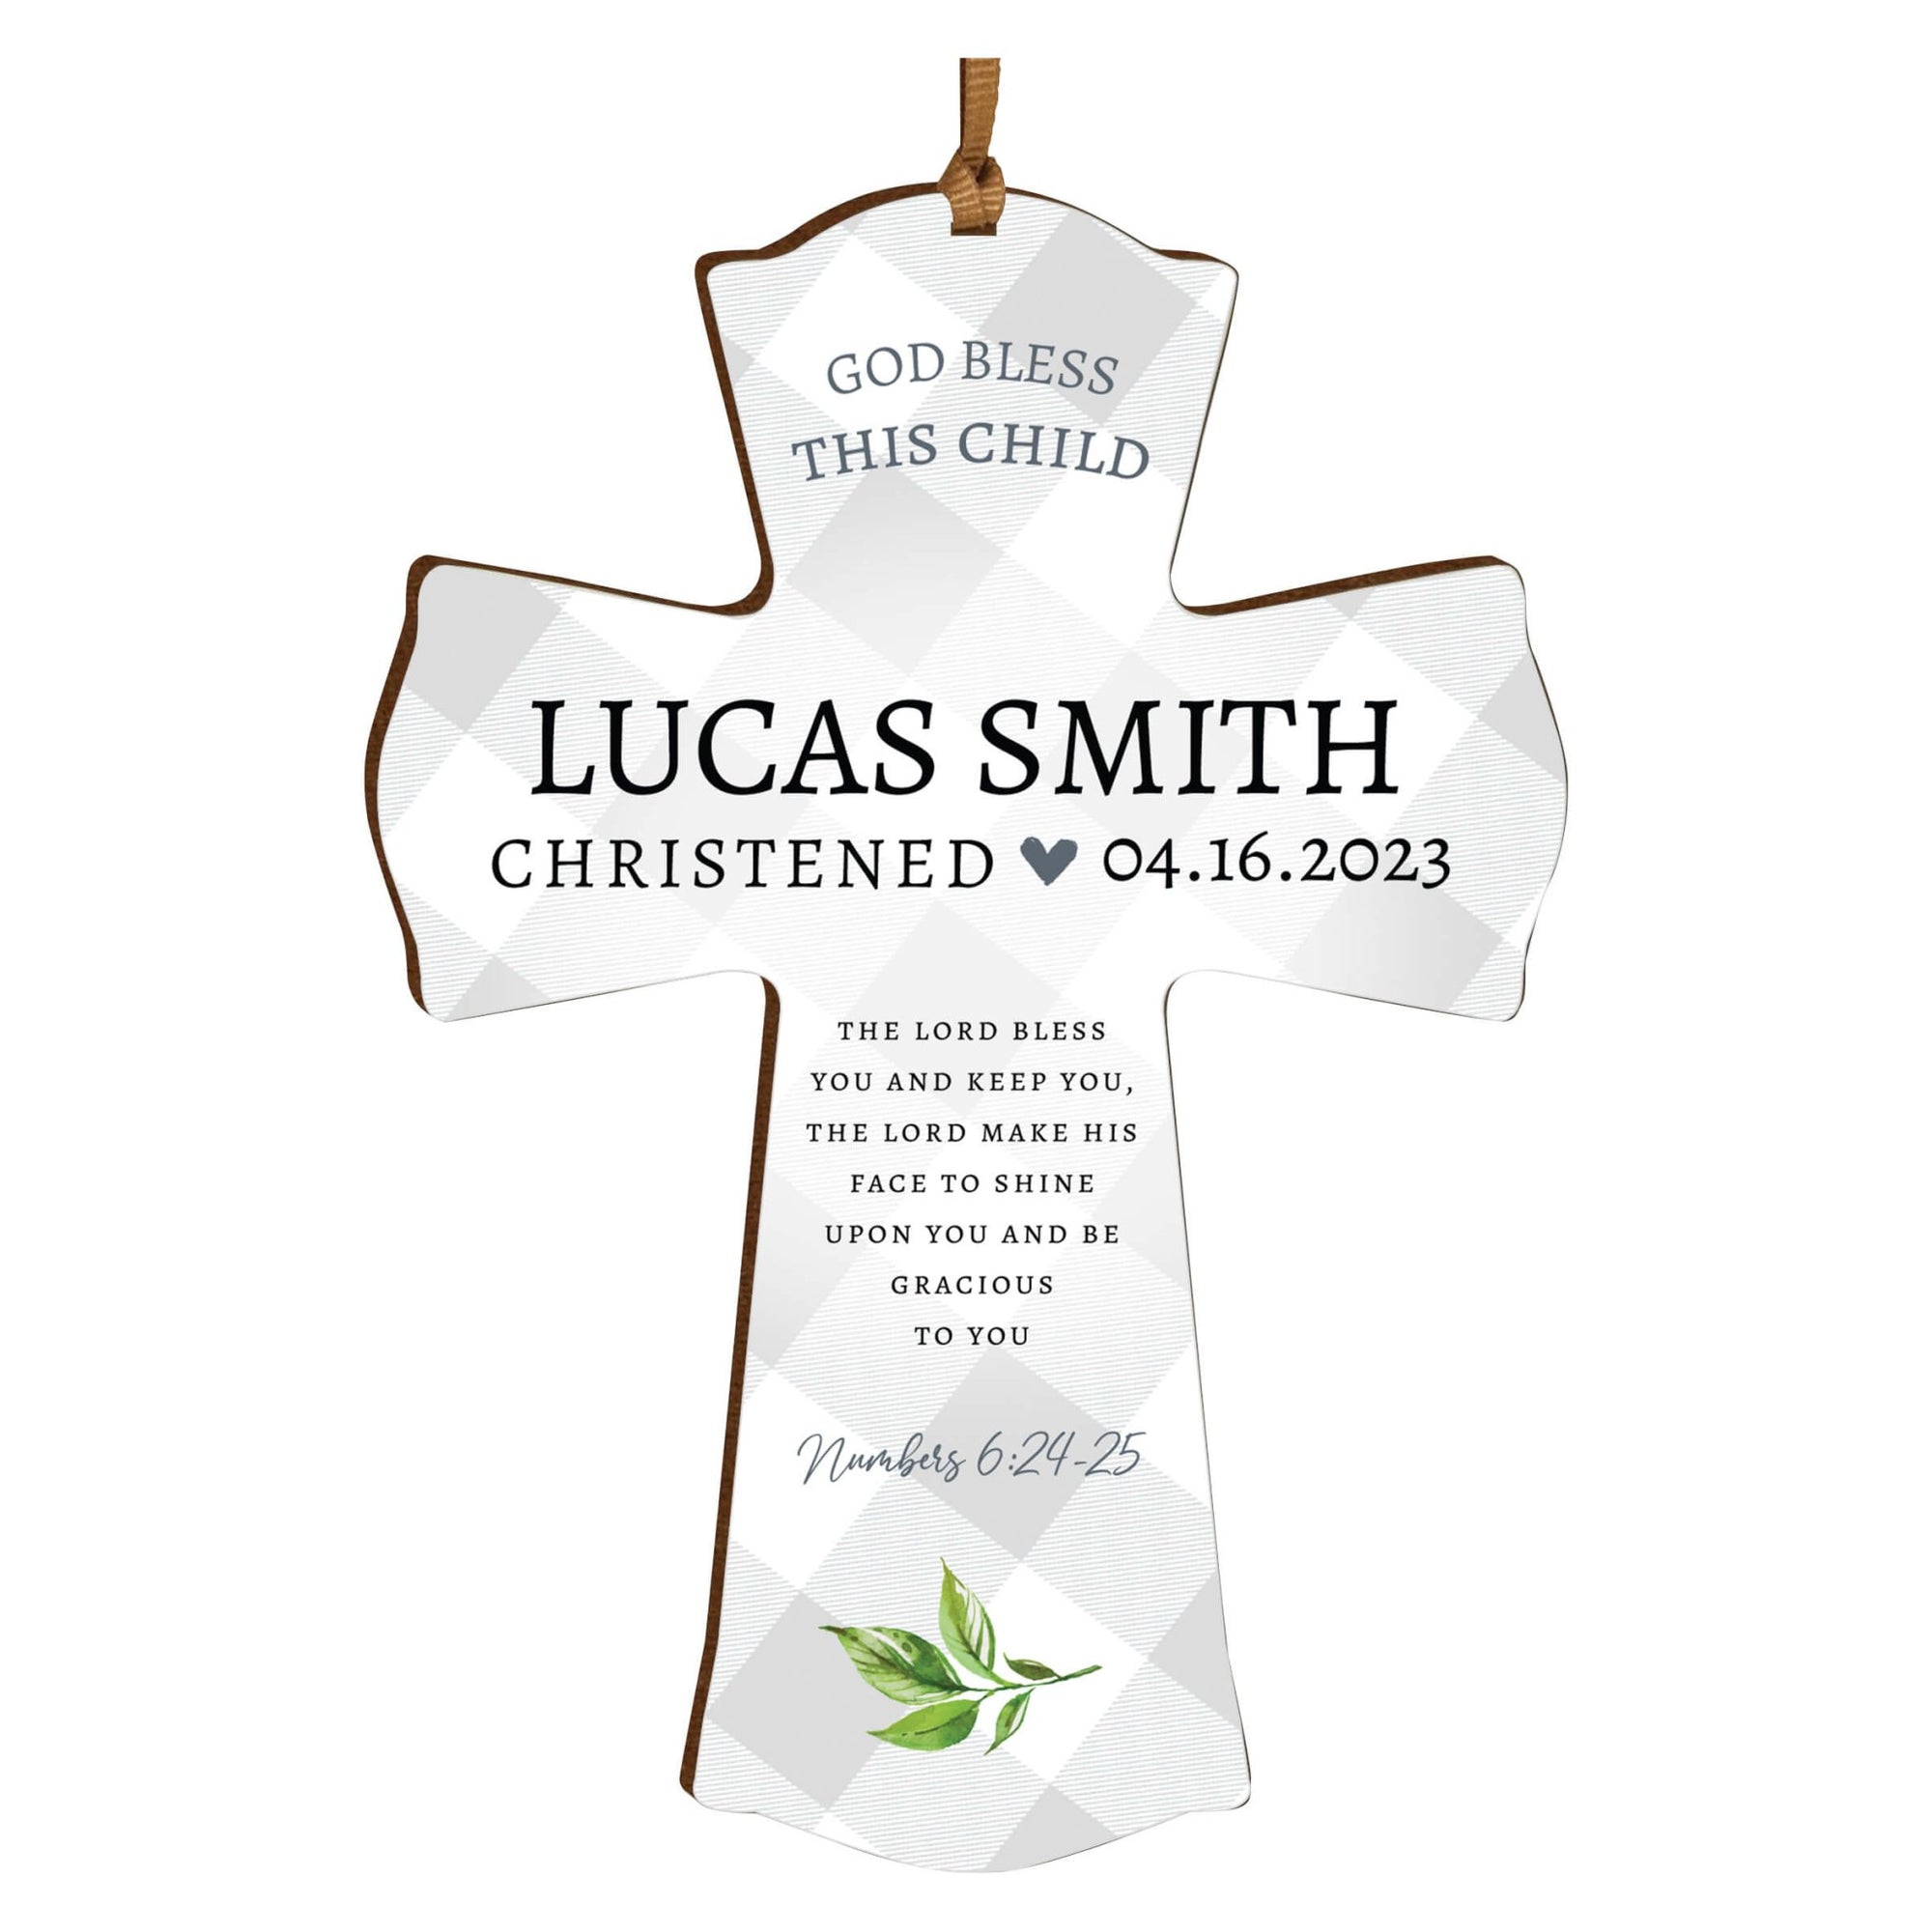 Personalized Christening Wooden Hanging Mini Cross - The Lord Bless - LifeSong Milestones